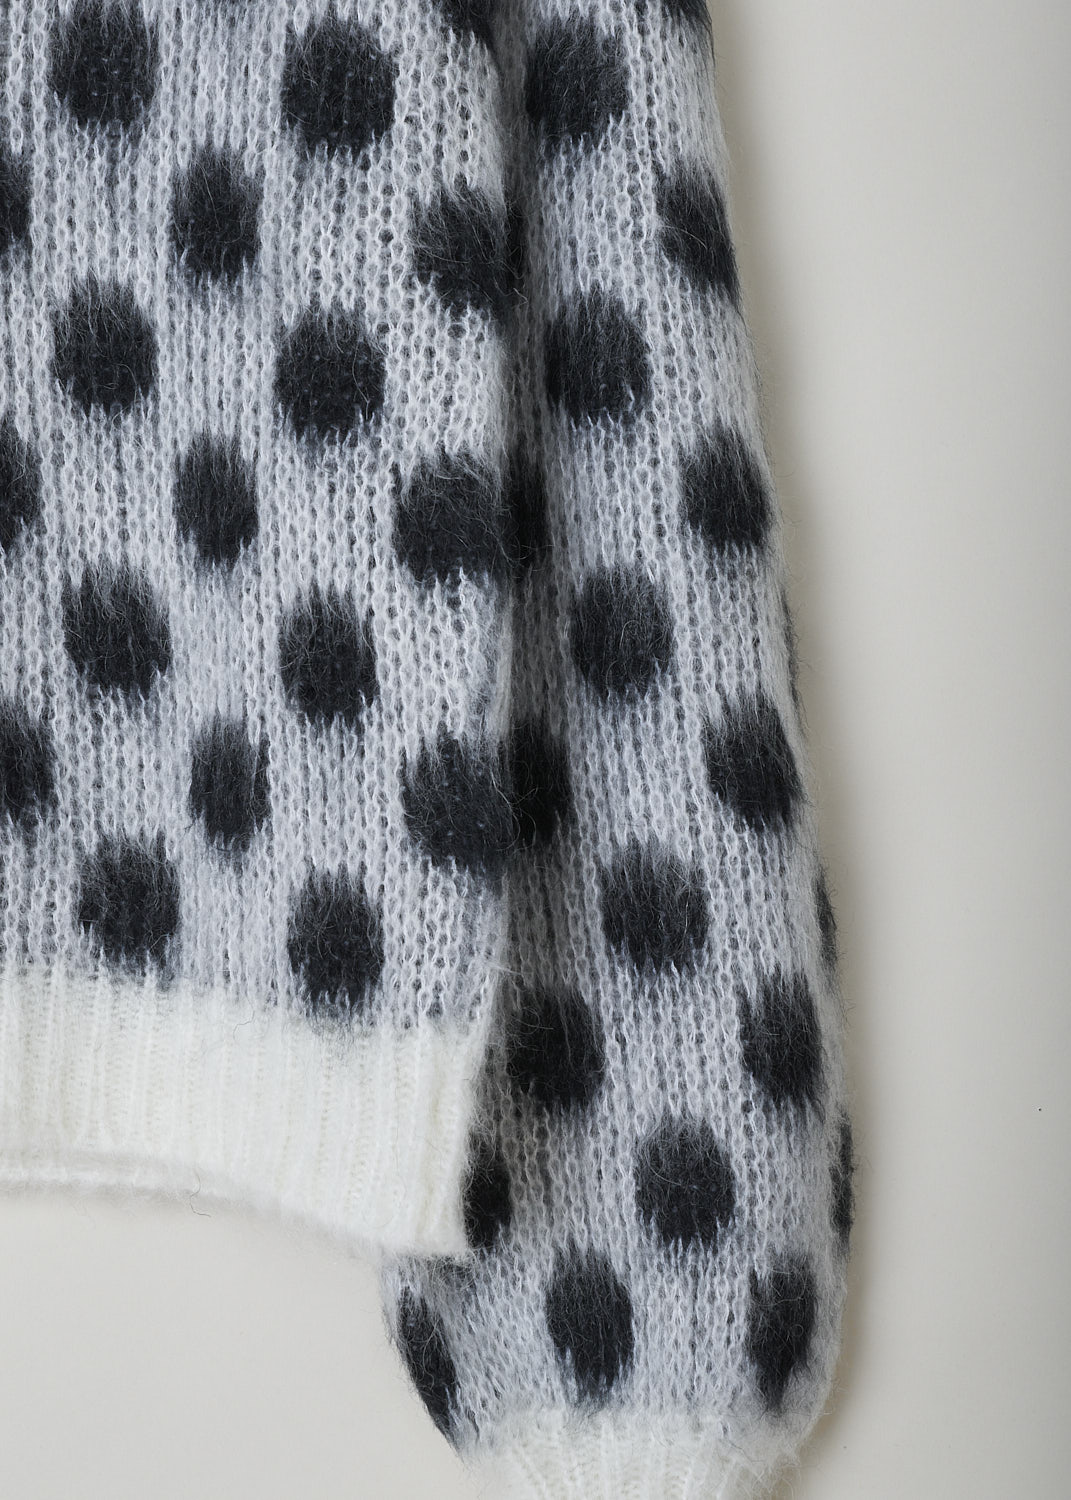 MARNI, BRUSHED DOTS FUZZY WUZZY SWEATER, GCMMD0476Q0_UFU160_DOW0, Grey, Print, Black, Detail 1, This brushed dots Fuzzy Wuzzy crew neck sweater has a white neckline with a ribbed finish. That same white ribbed finish can be found on the cuffs and hemline. The sweater has a two-tone dot pattern in grey and black.
